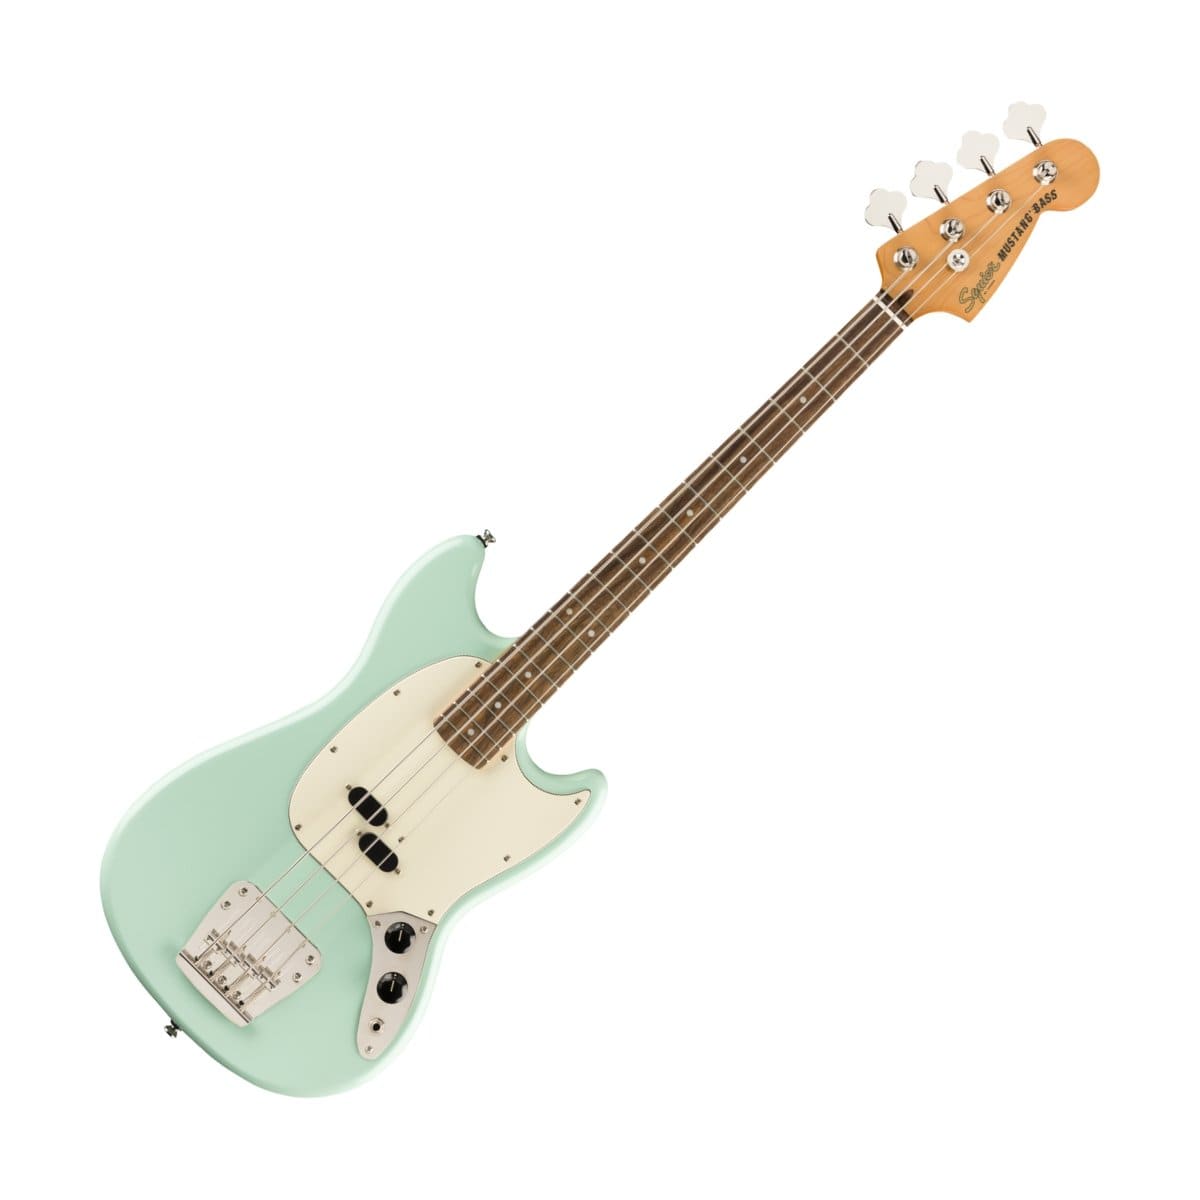 Squier Guitar Fender Squier Classic Vibe 60s Mustang Bass Surf Green - Byron Music